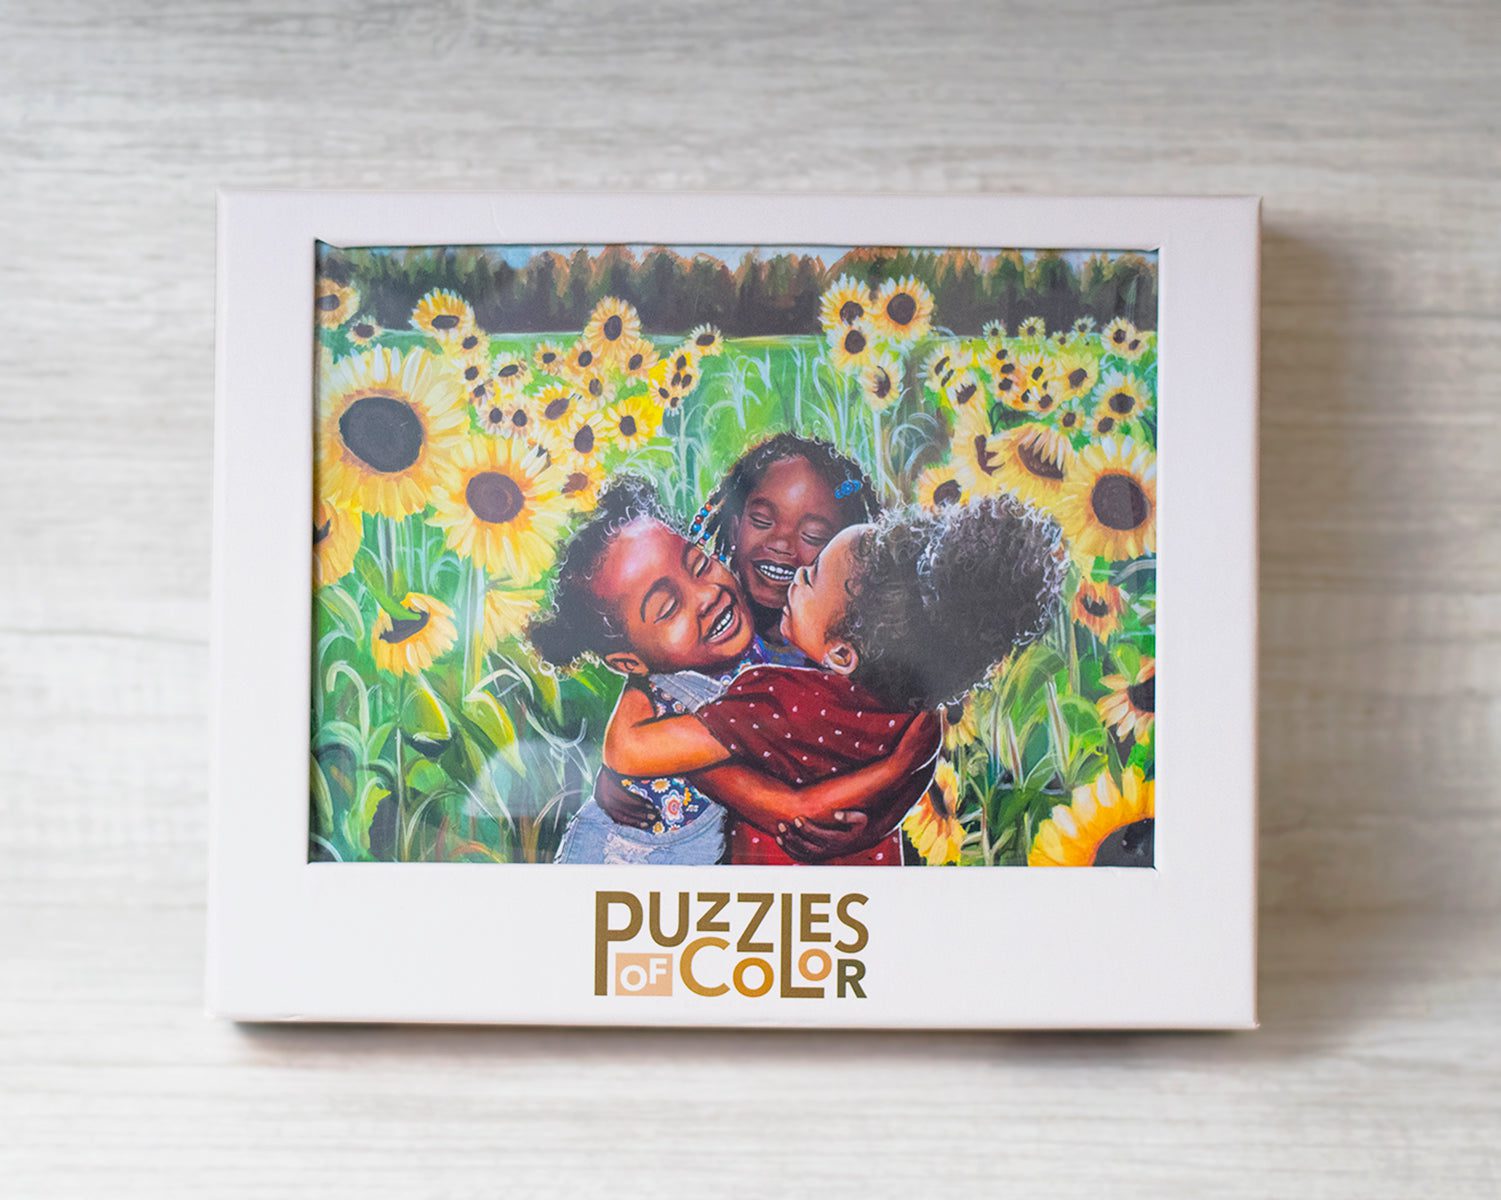 Puzzles of Color Box with Kids on the Cover